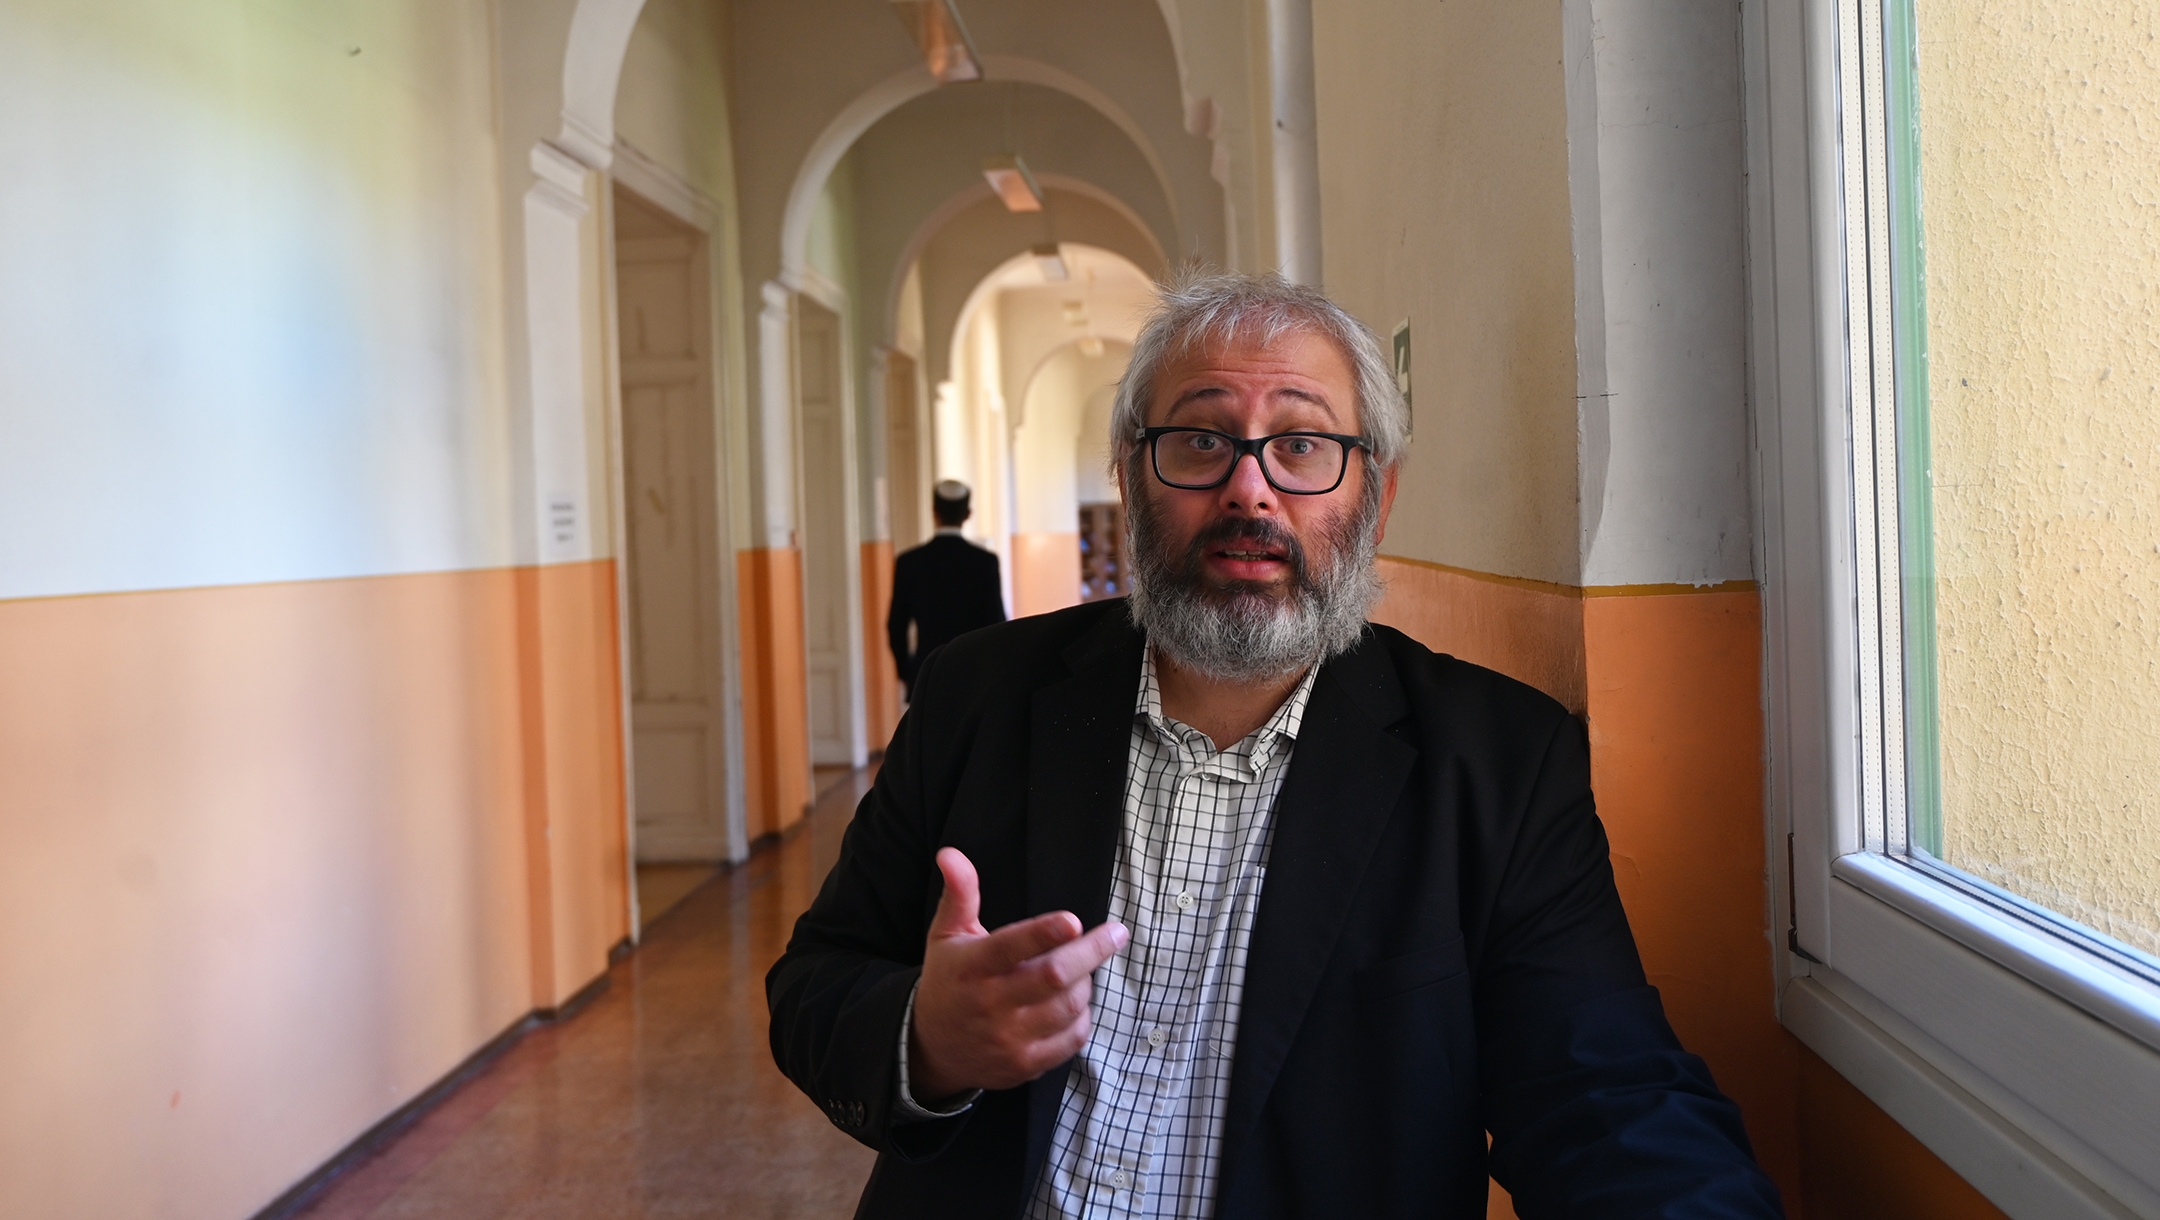 Rabbi Gabor Finali speaks to a journalist at the The Budapest University of Jewish Studies in Budapest, Hungary on Aug. 29, 2021. (Cnaan Liphshiz)